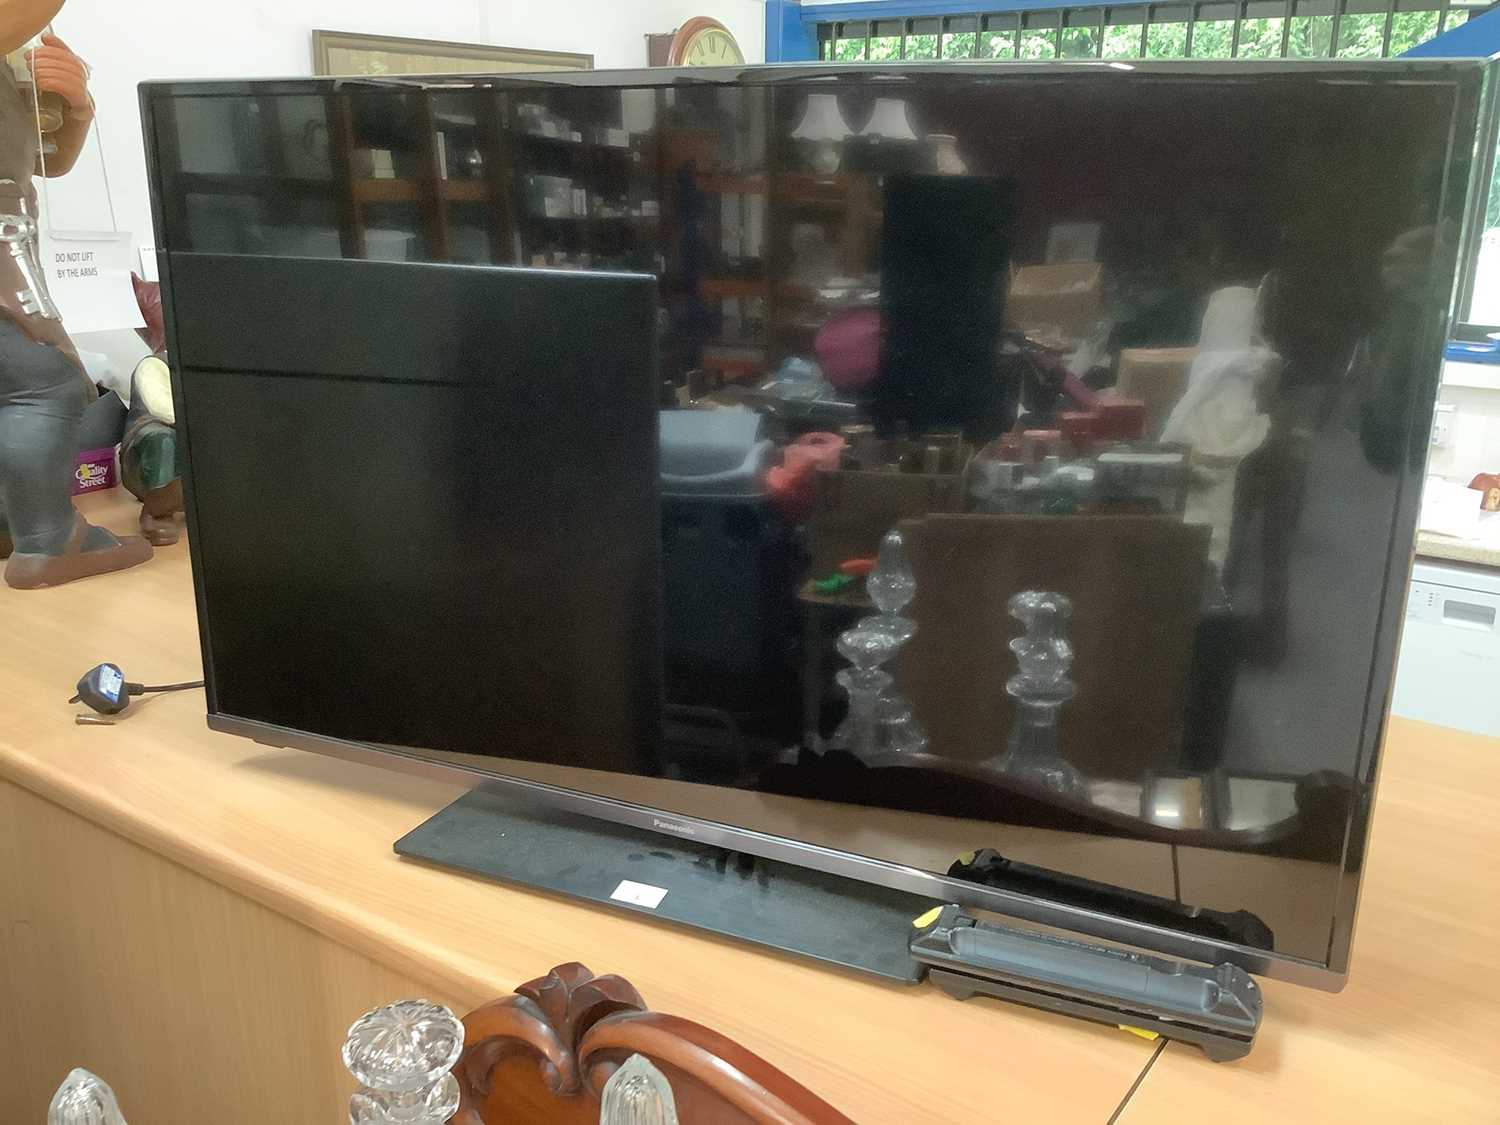 Lot 3 - 43" Panasonic Smart TV with remote control. Please not that it has a slight damage to the top of TV, please see images.